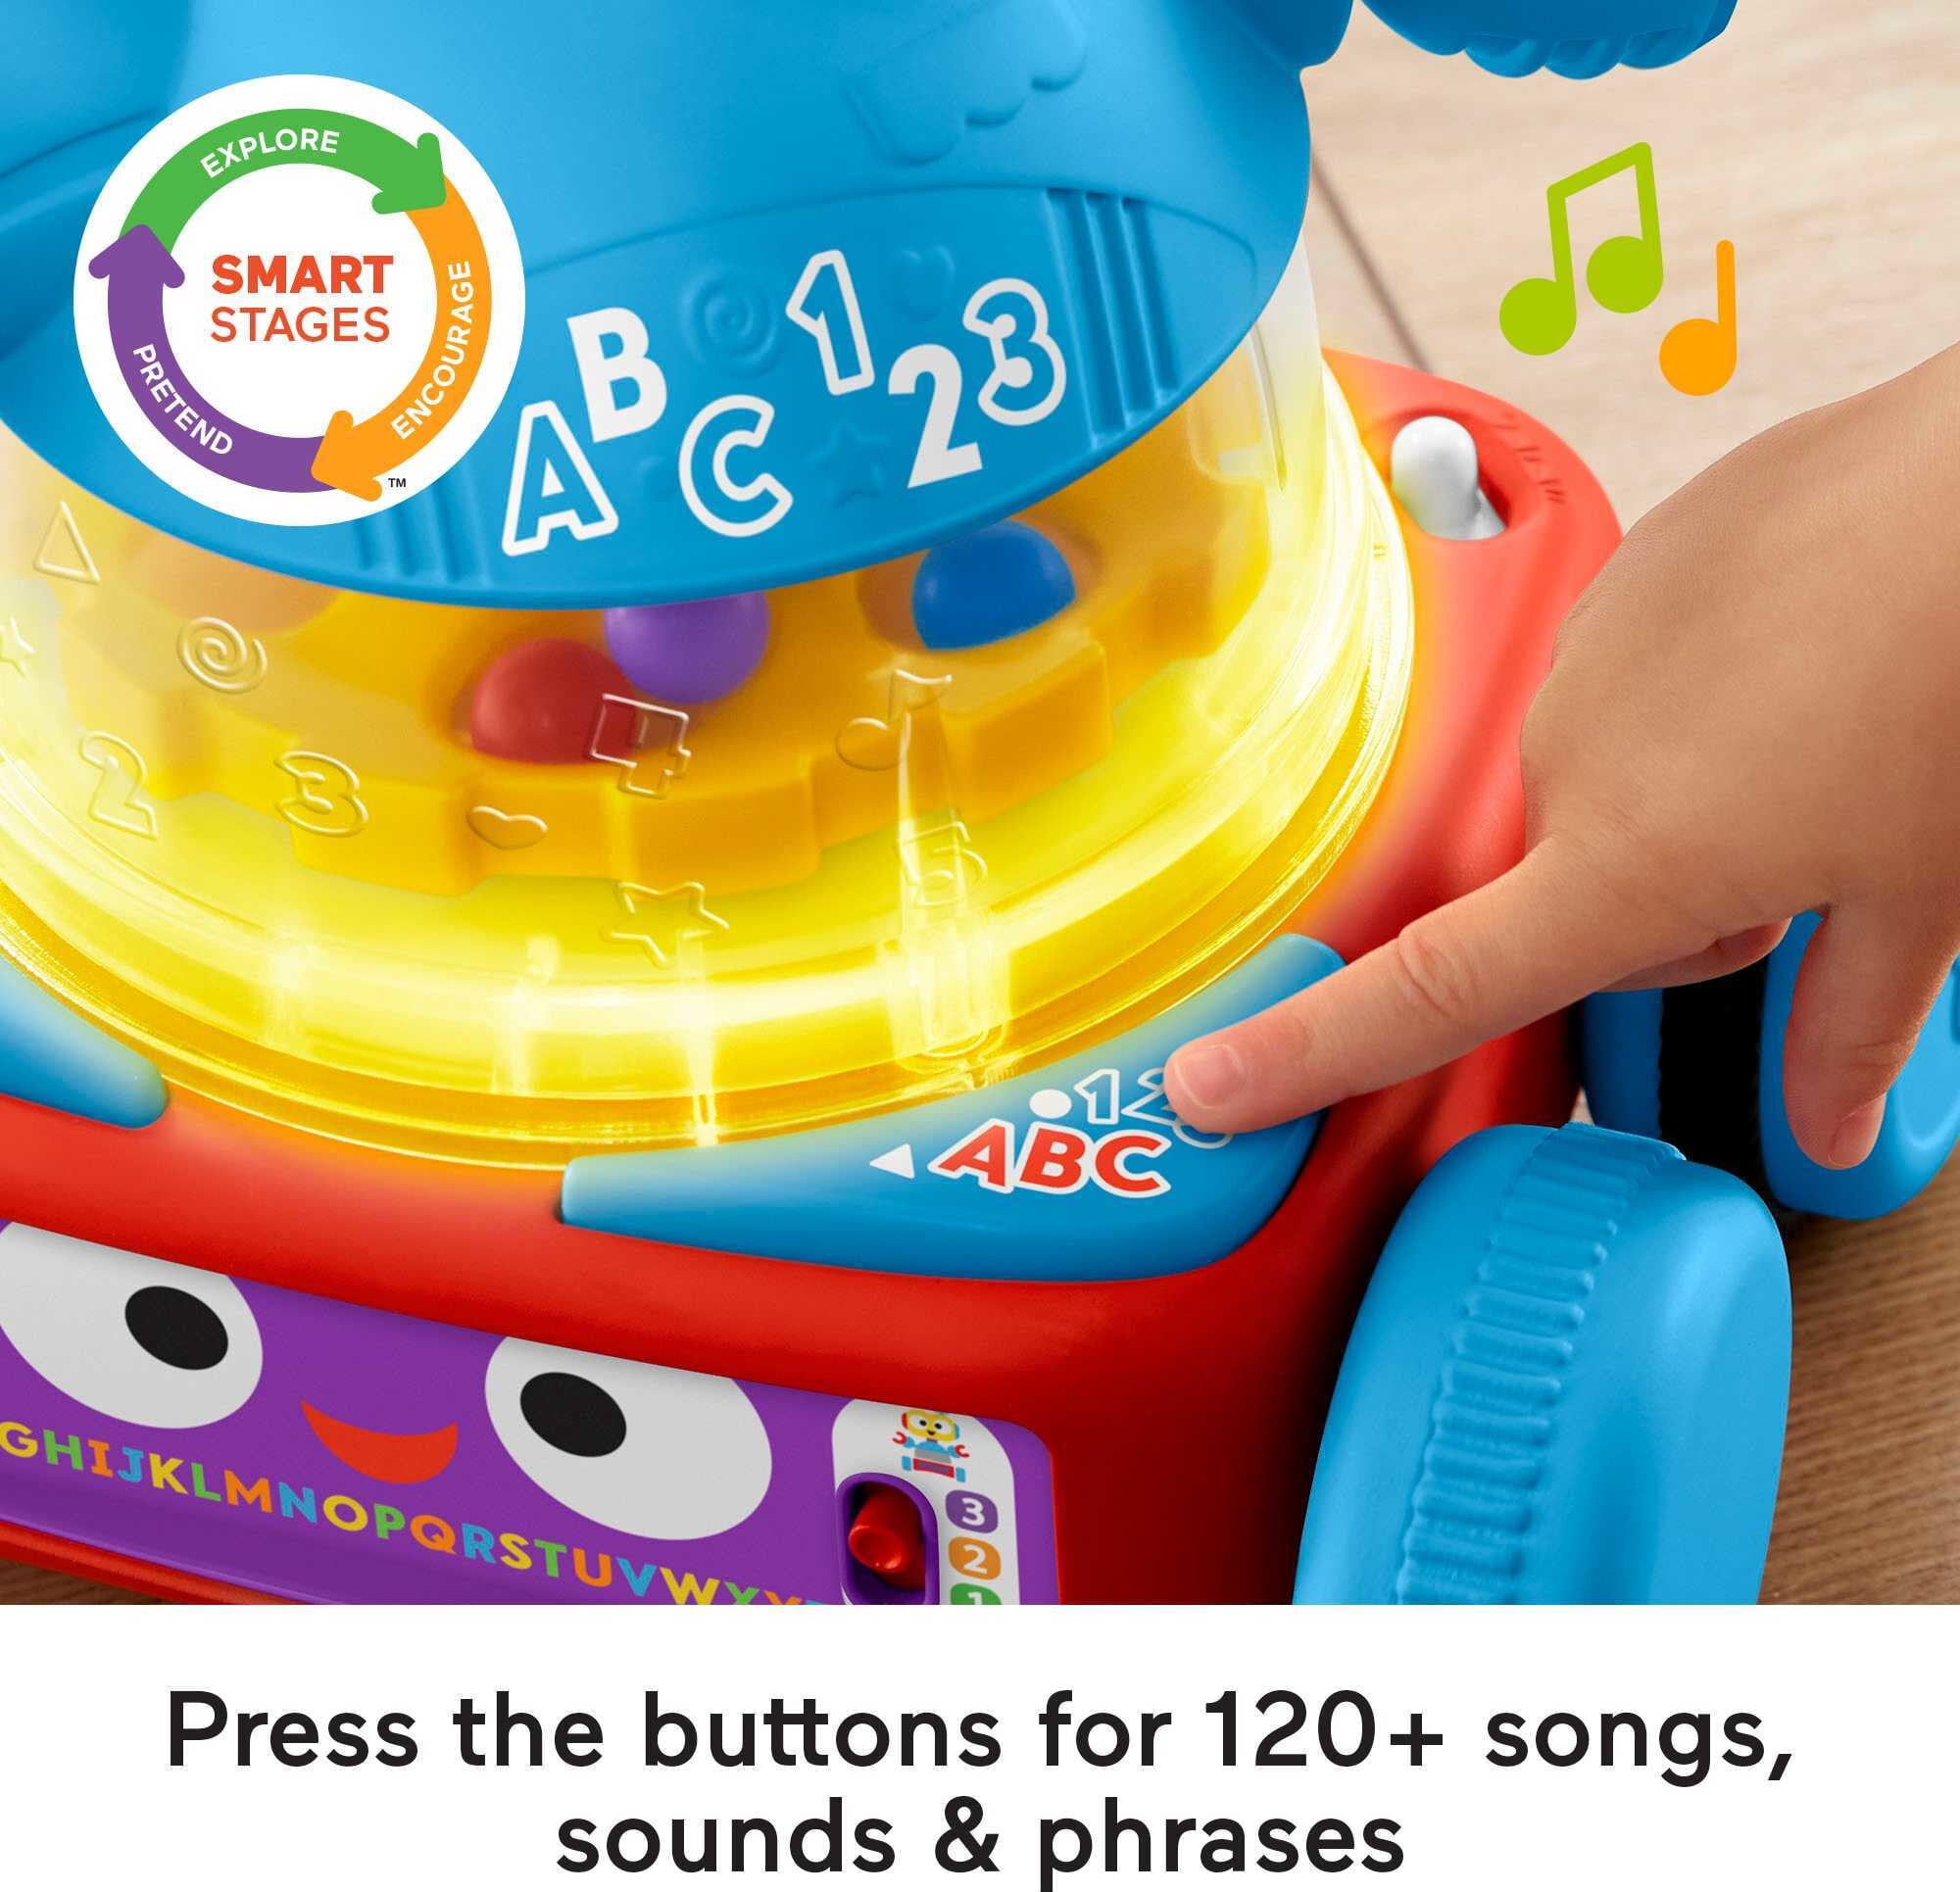 Fisher-Price Baby to Preschool Learning Toy Robot with Lights & Music, 4-in-1 Ultimate Learning Bot - 3